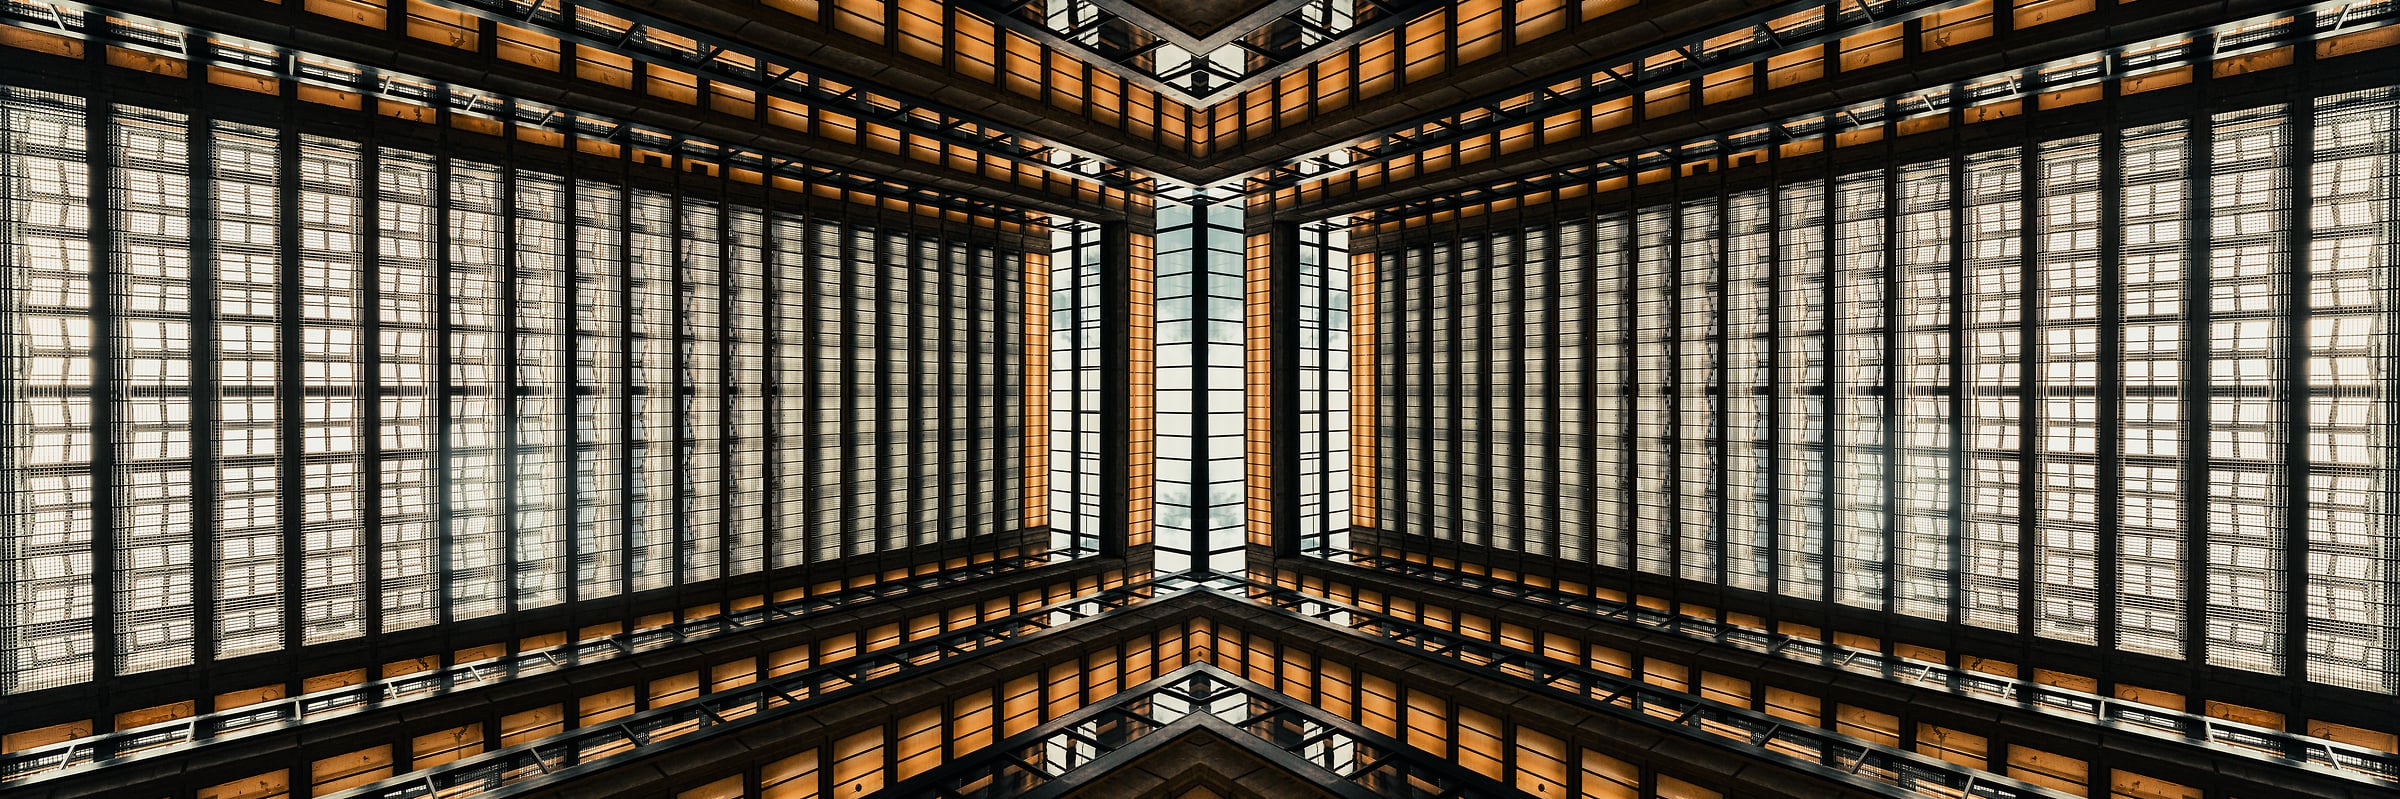 120 megapixels! A very high resolution, large-format, abstract architecture photo; photograph created by Beyti Barbaros at Bell Labs Holmdel Complex, Holmdel, NJ.